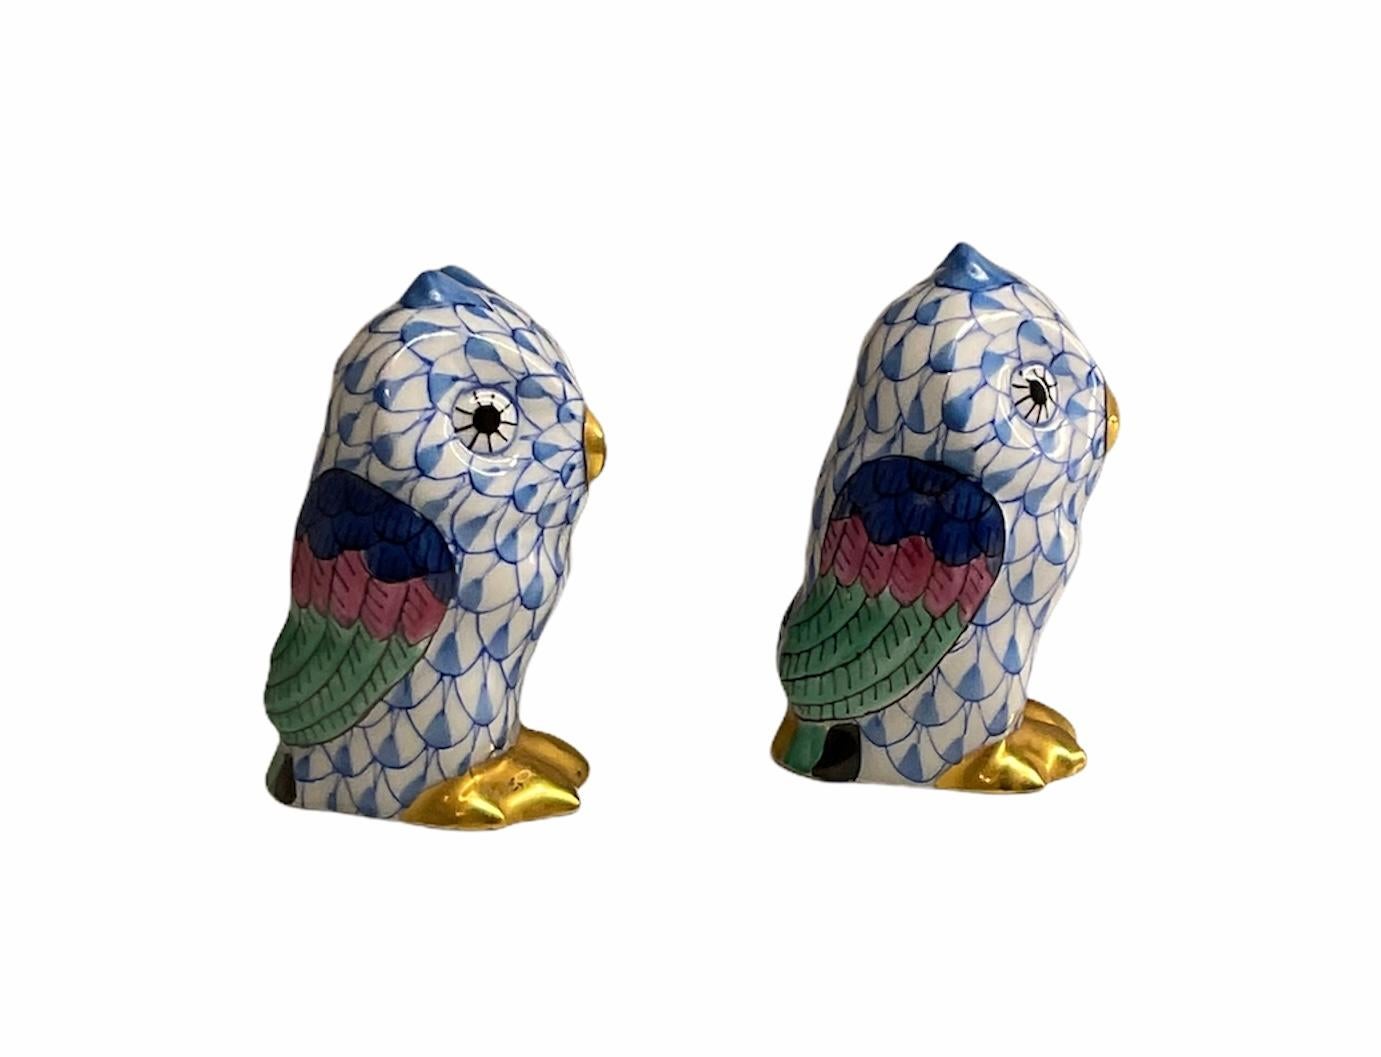 This a pair of Herend porcelain hand painted miniatures owls figurines. They are painted white in the background with royal blue fish scale pattern. They have large black eyes, gilded peaks and feet. Their feathers are painted blue, pink and green.